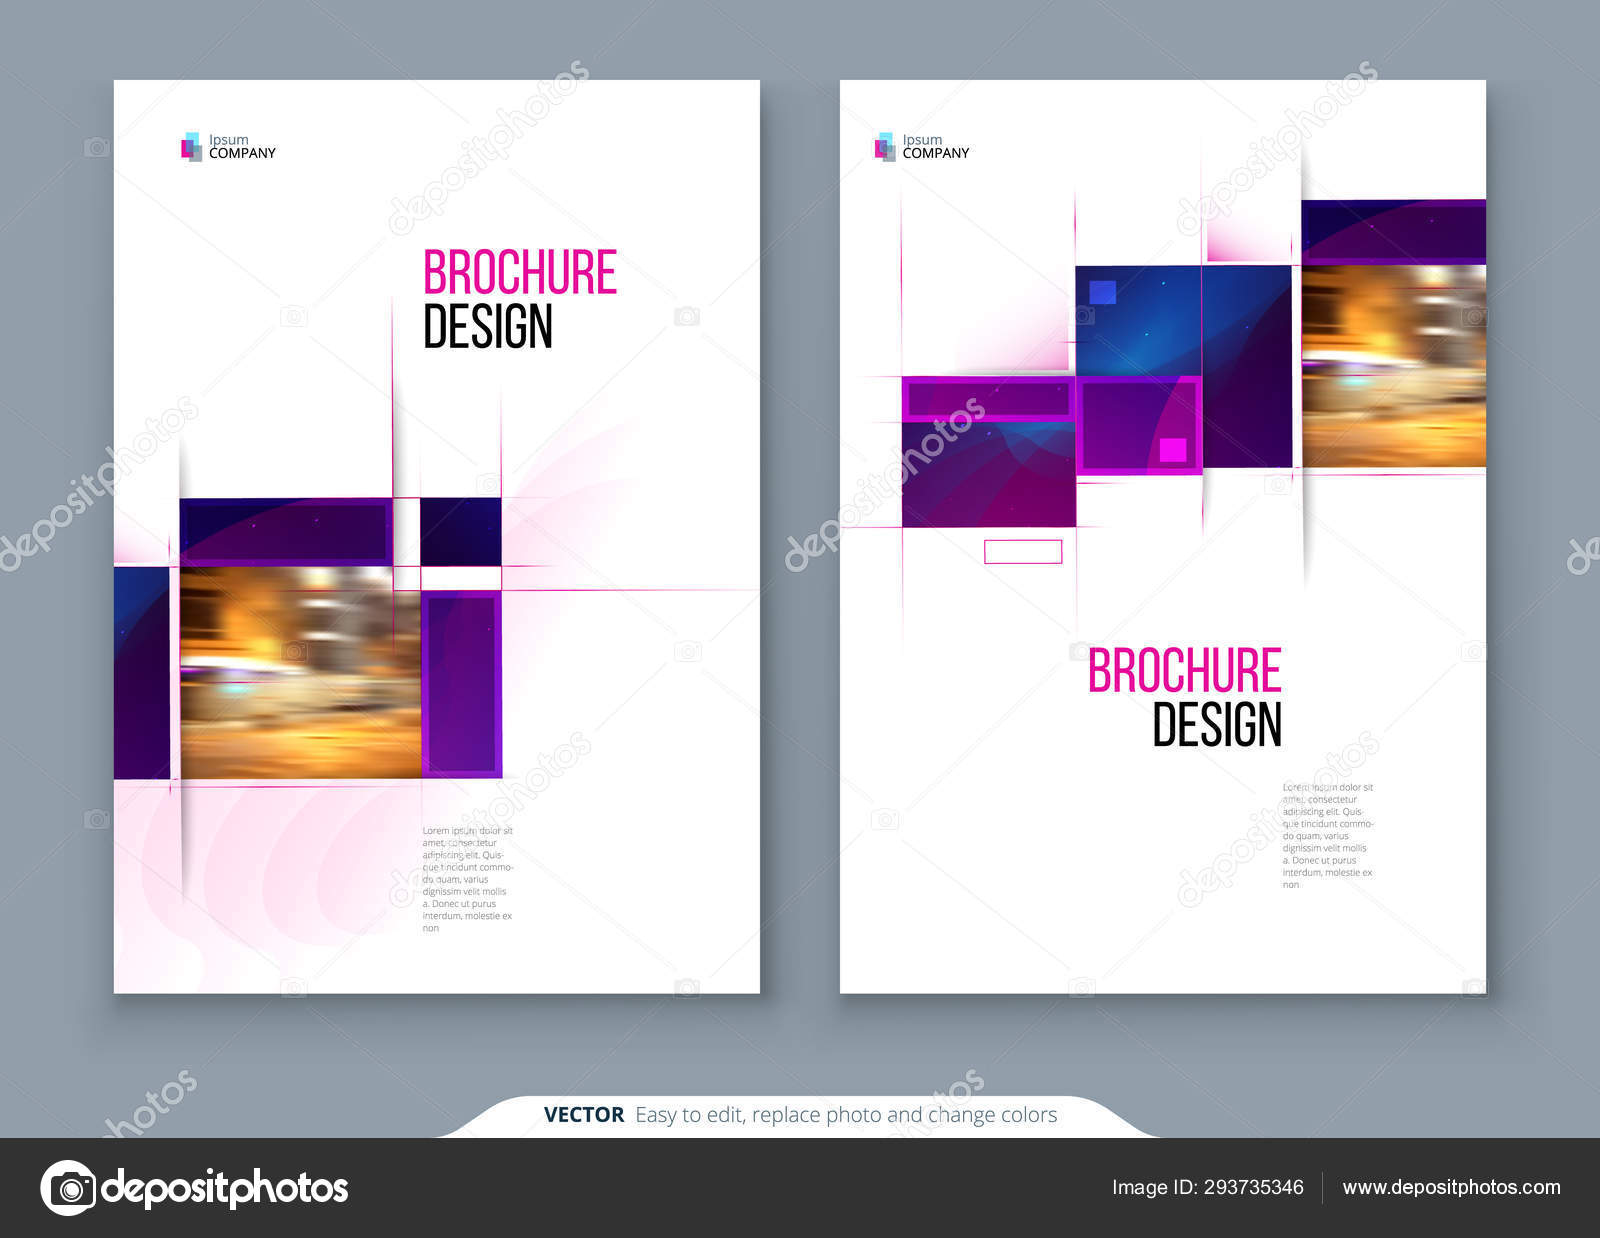 Download Brochure Template Layout Design Corporate Business Annual Report Catalog Magazine Flyer Mockup Creative Modern Bright Concept With Square Shapes Stock Vector Royalty Free Vector Image By C Greatbergens 293735346